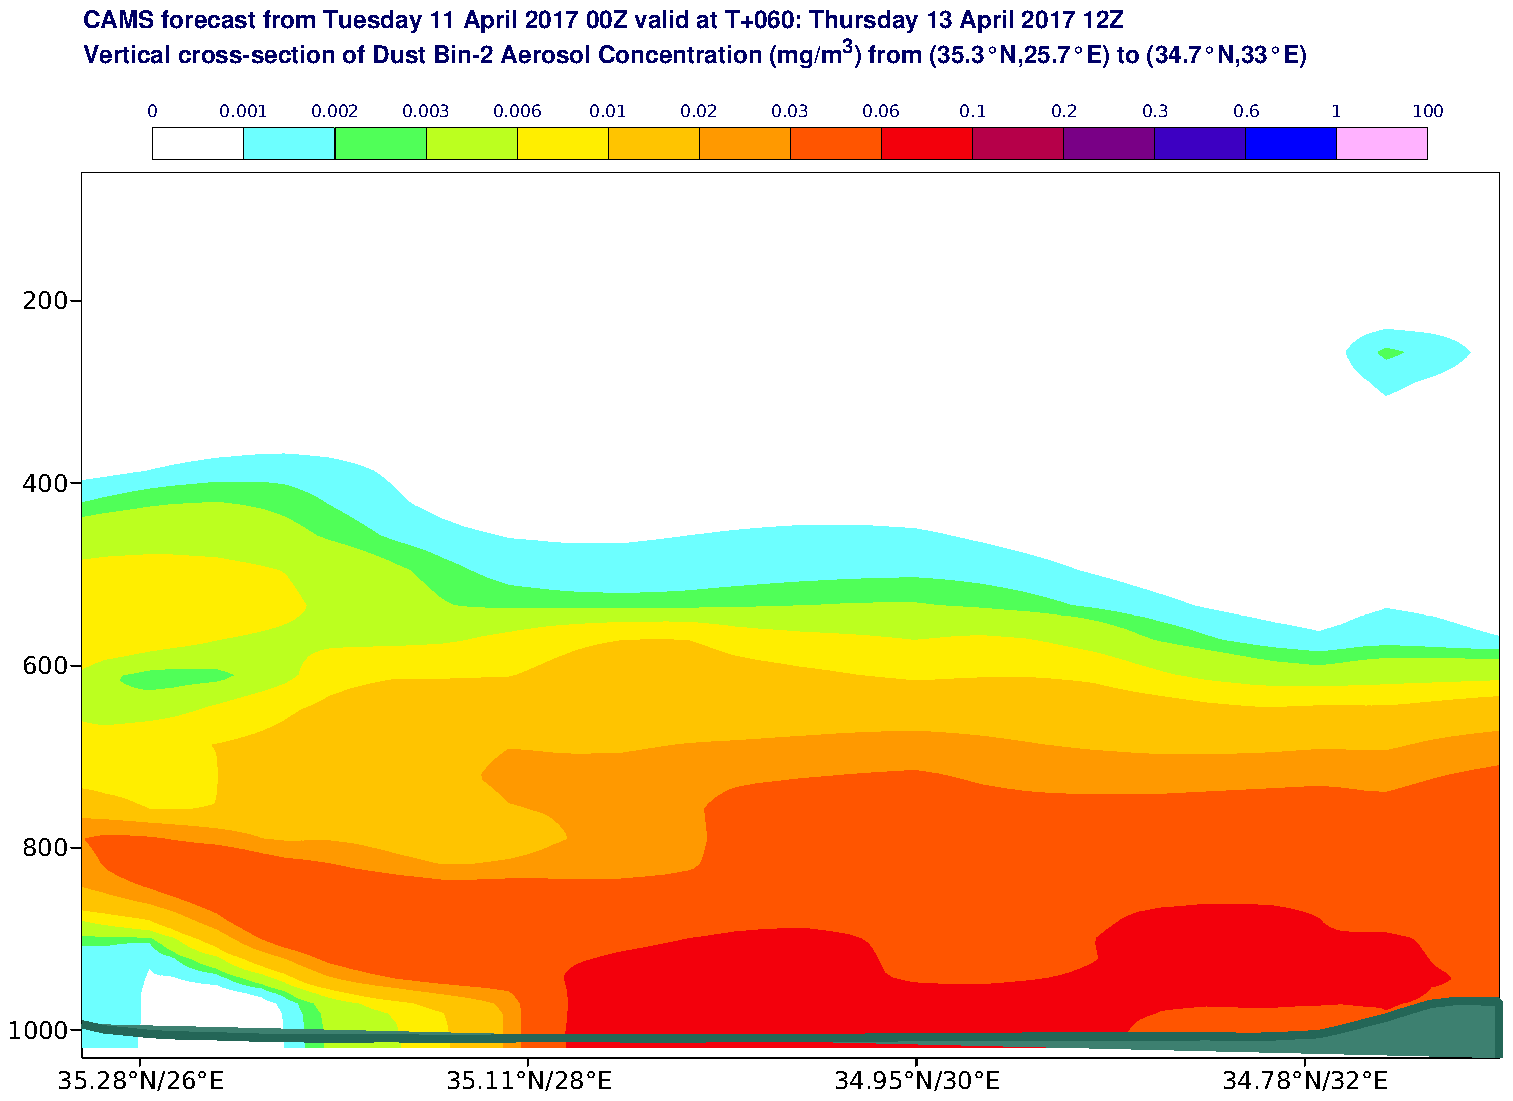 Vertical cross-section of Dust Bin-2 Aerosol Concentration (mg/m3) valid at T60 - 2017-04-13 12:00